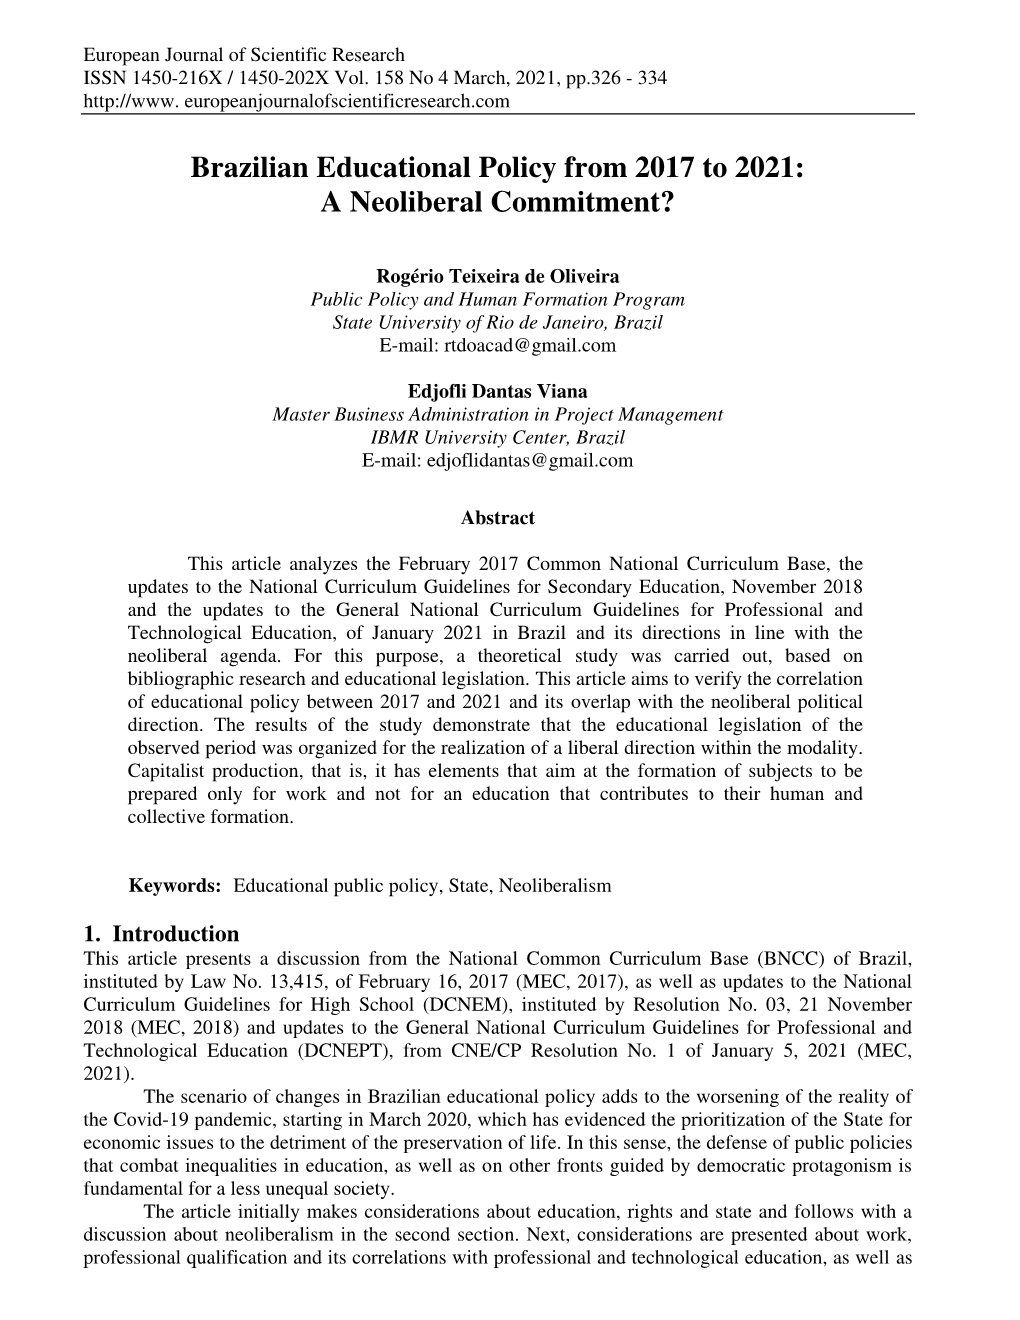 Brazilian Educational Policy from 2017 to 2021: a Neoliberal Commitment?